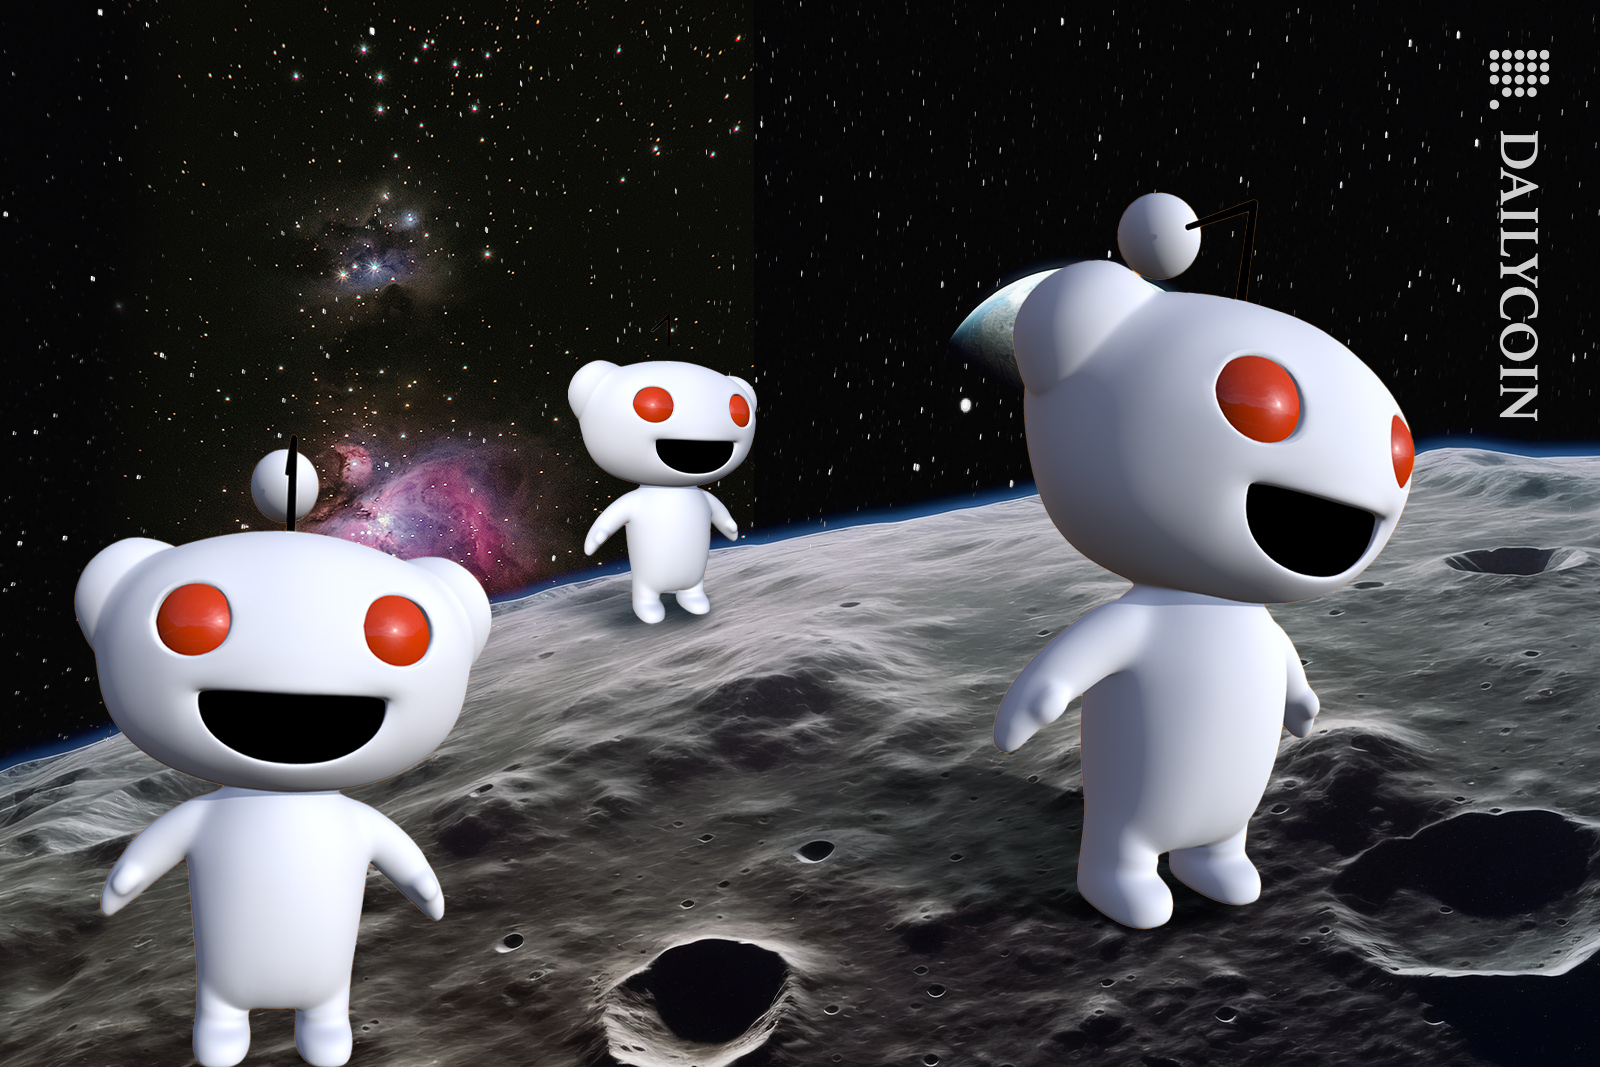 Reddit characters are over the moon.